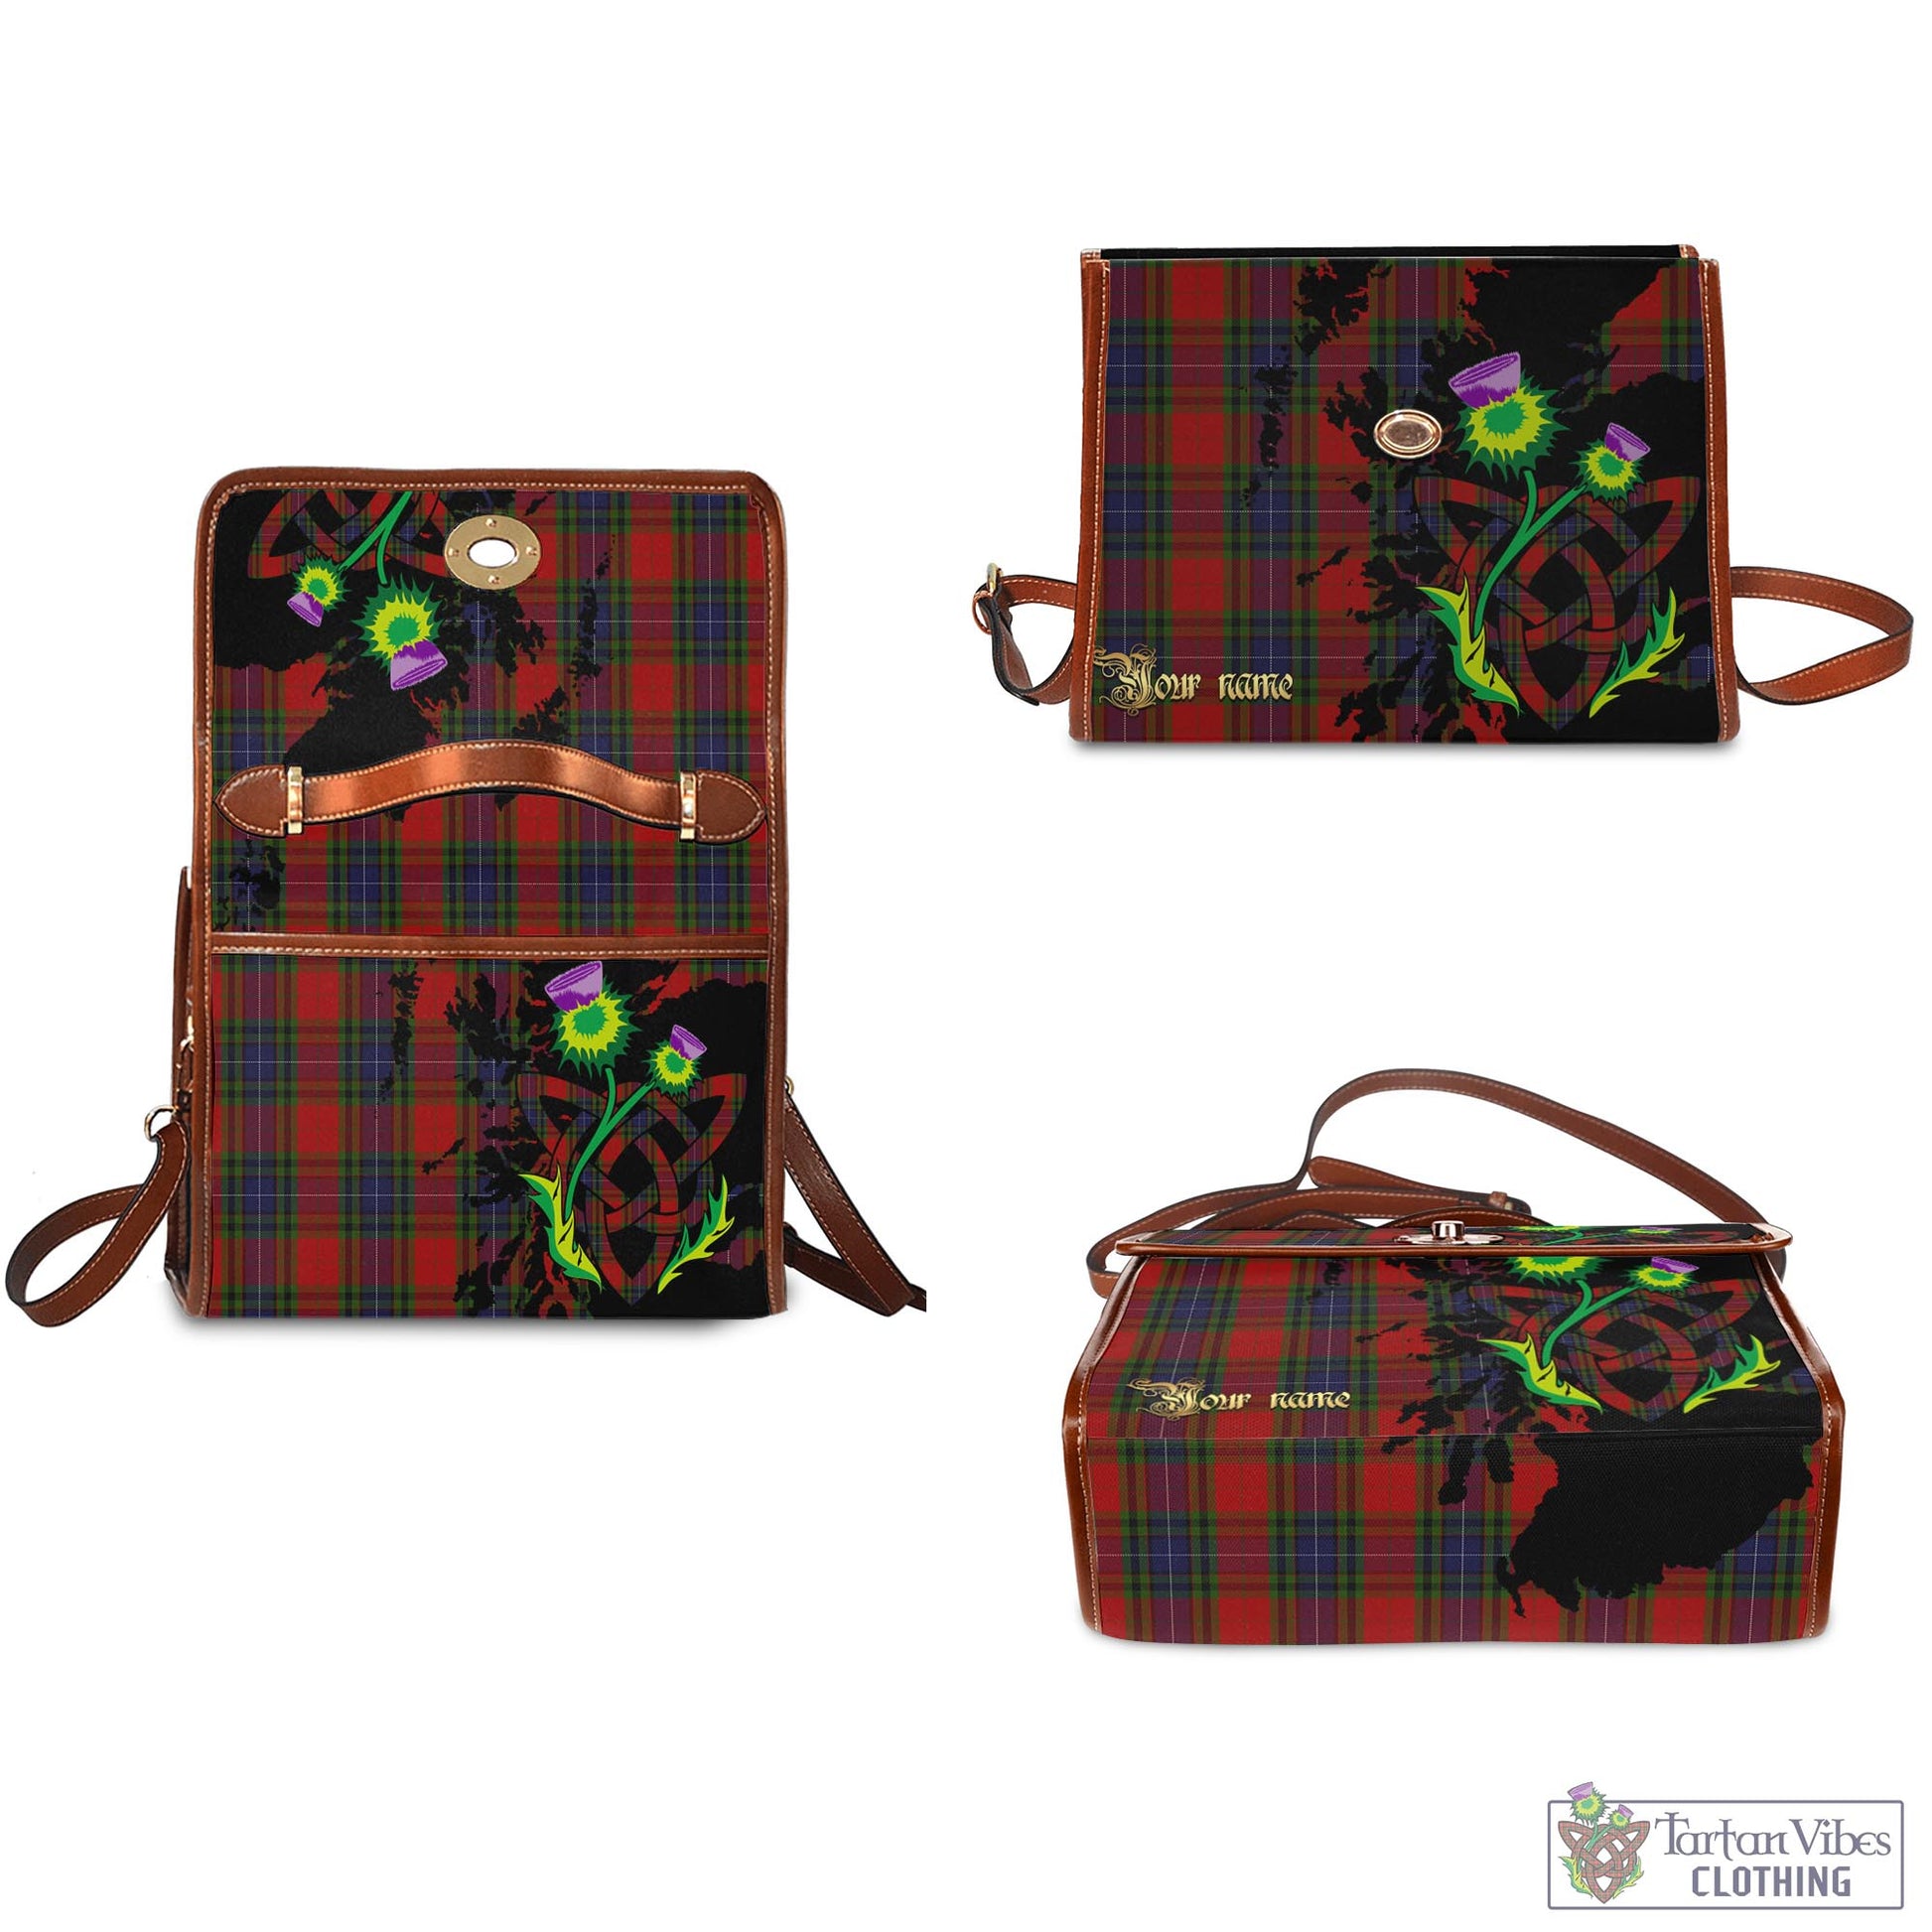 Tartan Vibes Clothing Manson Tartan Waterproof Canvas Bag with Scotland Map and Thistle Celtic Accents